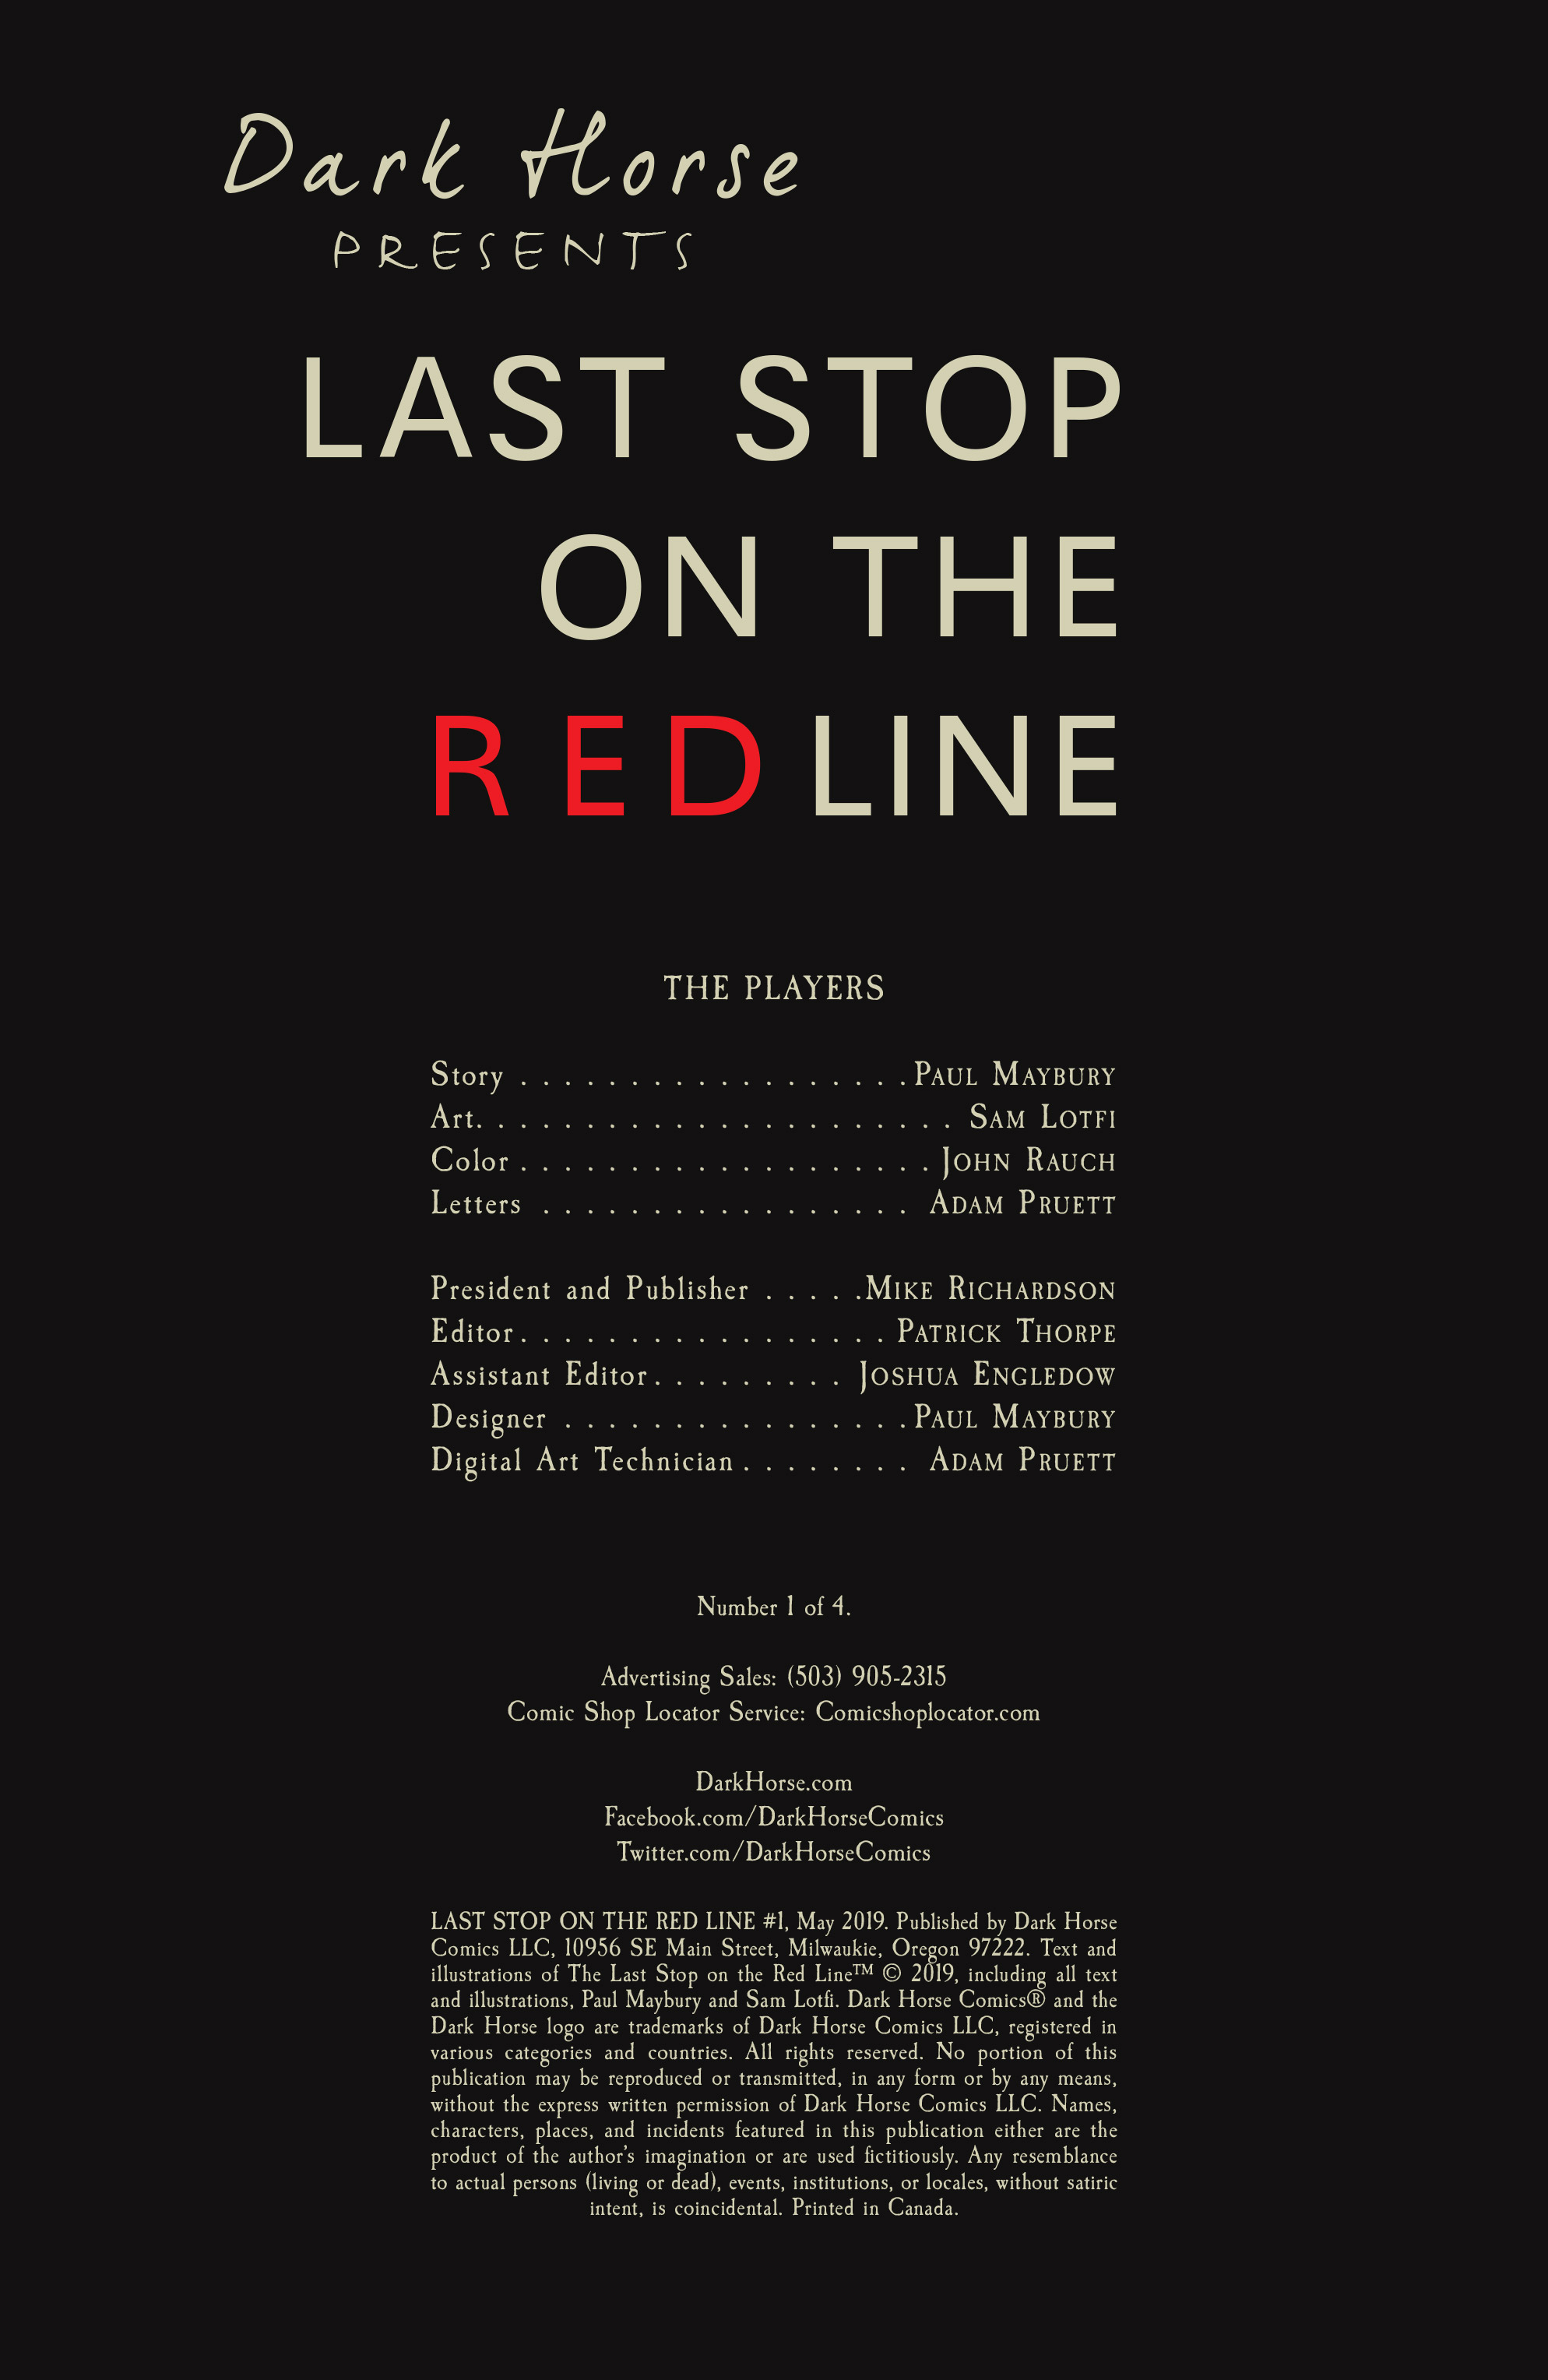 Read online Last Stop On the Red Line comic -  Issue #1 - 2